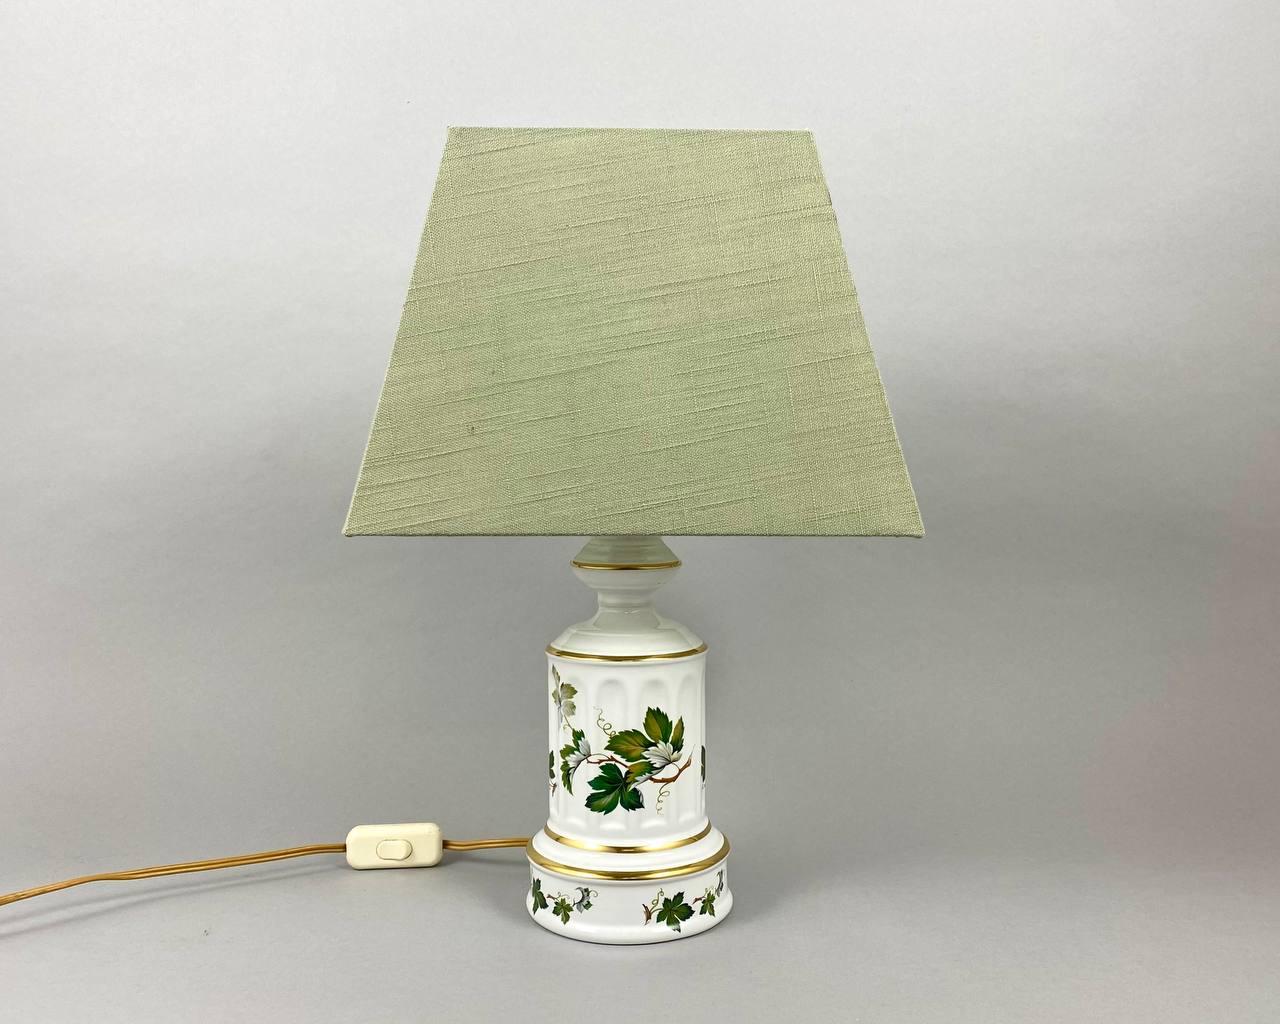 Vintage porcelain table lamp from Porcelain De Bruxelles, Belgium.

 Beautiful base made of white porcelain with elegant floral decor and gilding.

 The lampshade is new, covered with a mint-colored fabric.

 The convenient switch is located